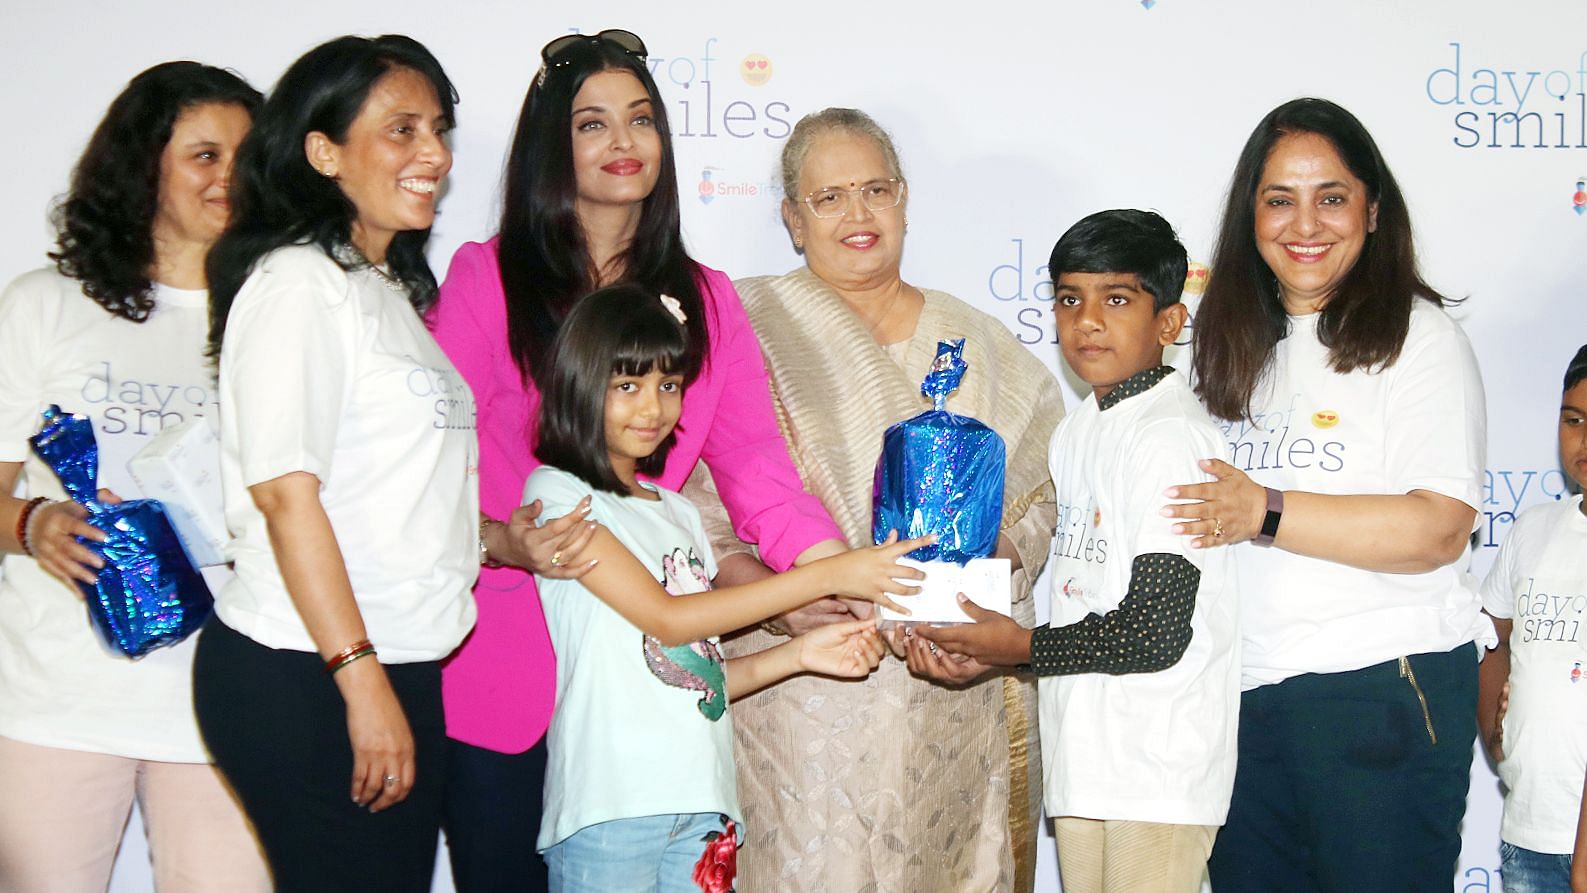 Aishwarya and Aaradhya Bachchan celebrate 20 years of the Day of Smiles.&nbsp;